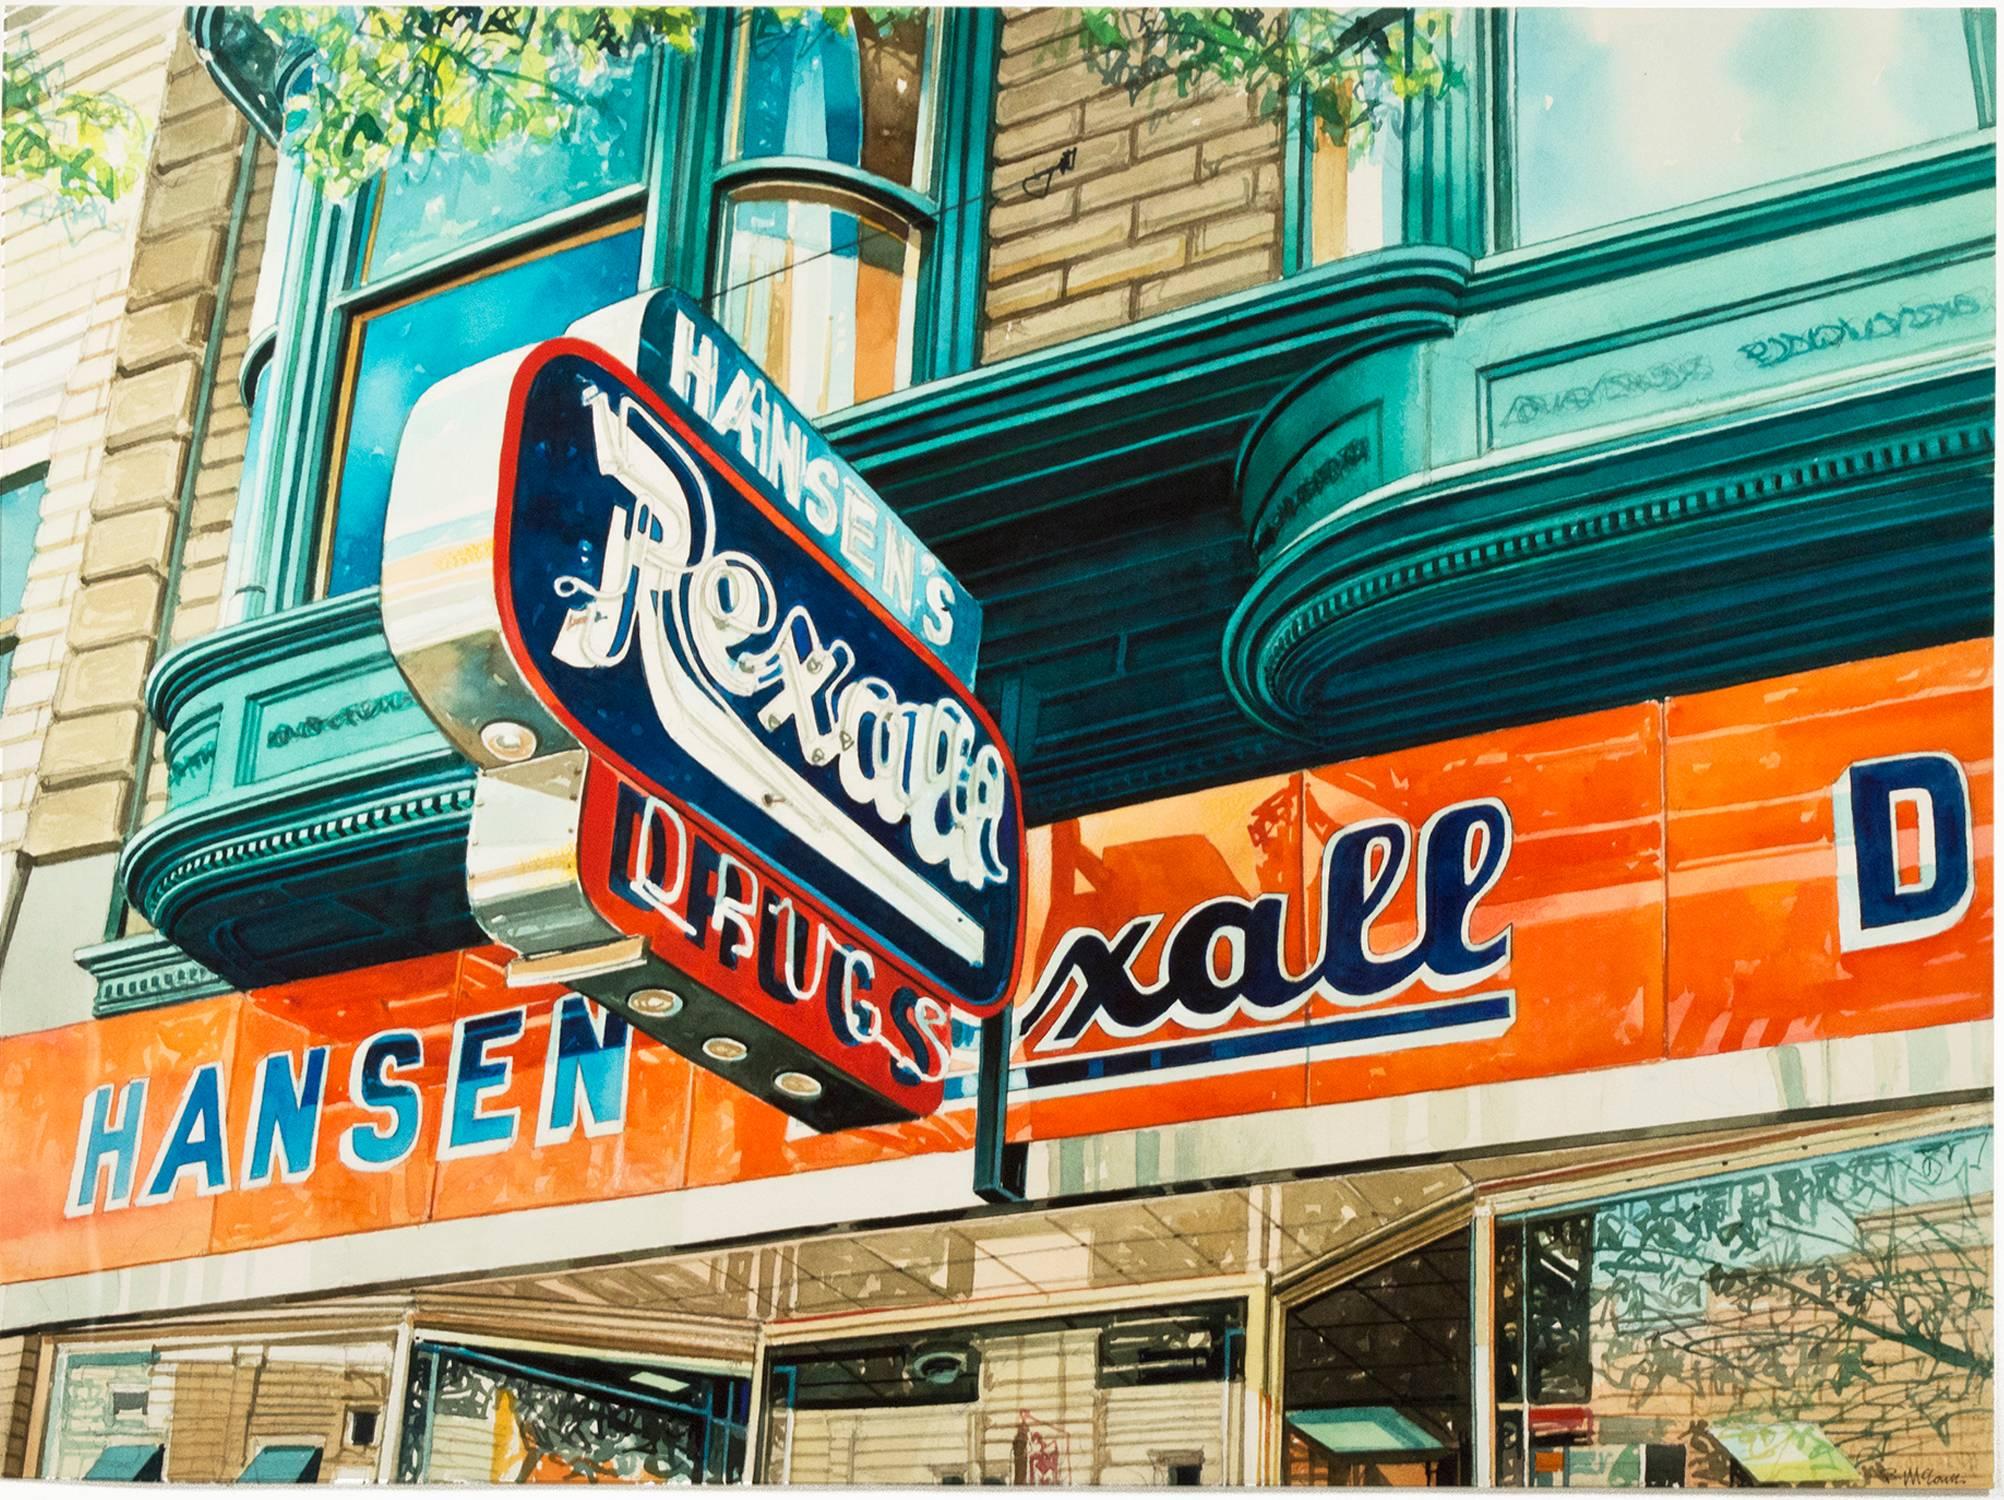 "Hansen's Rexall Drugs, " Watercolor signed by Bruce McCombs